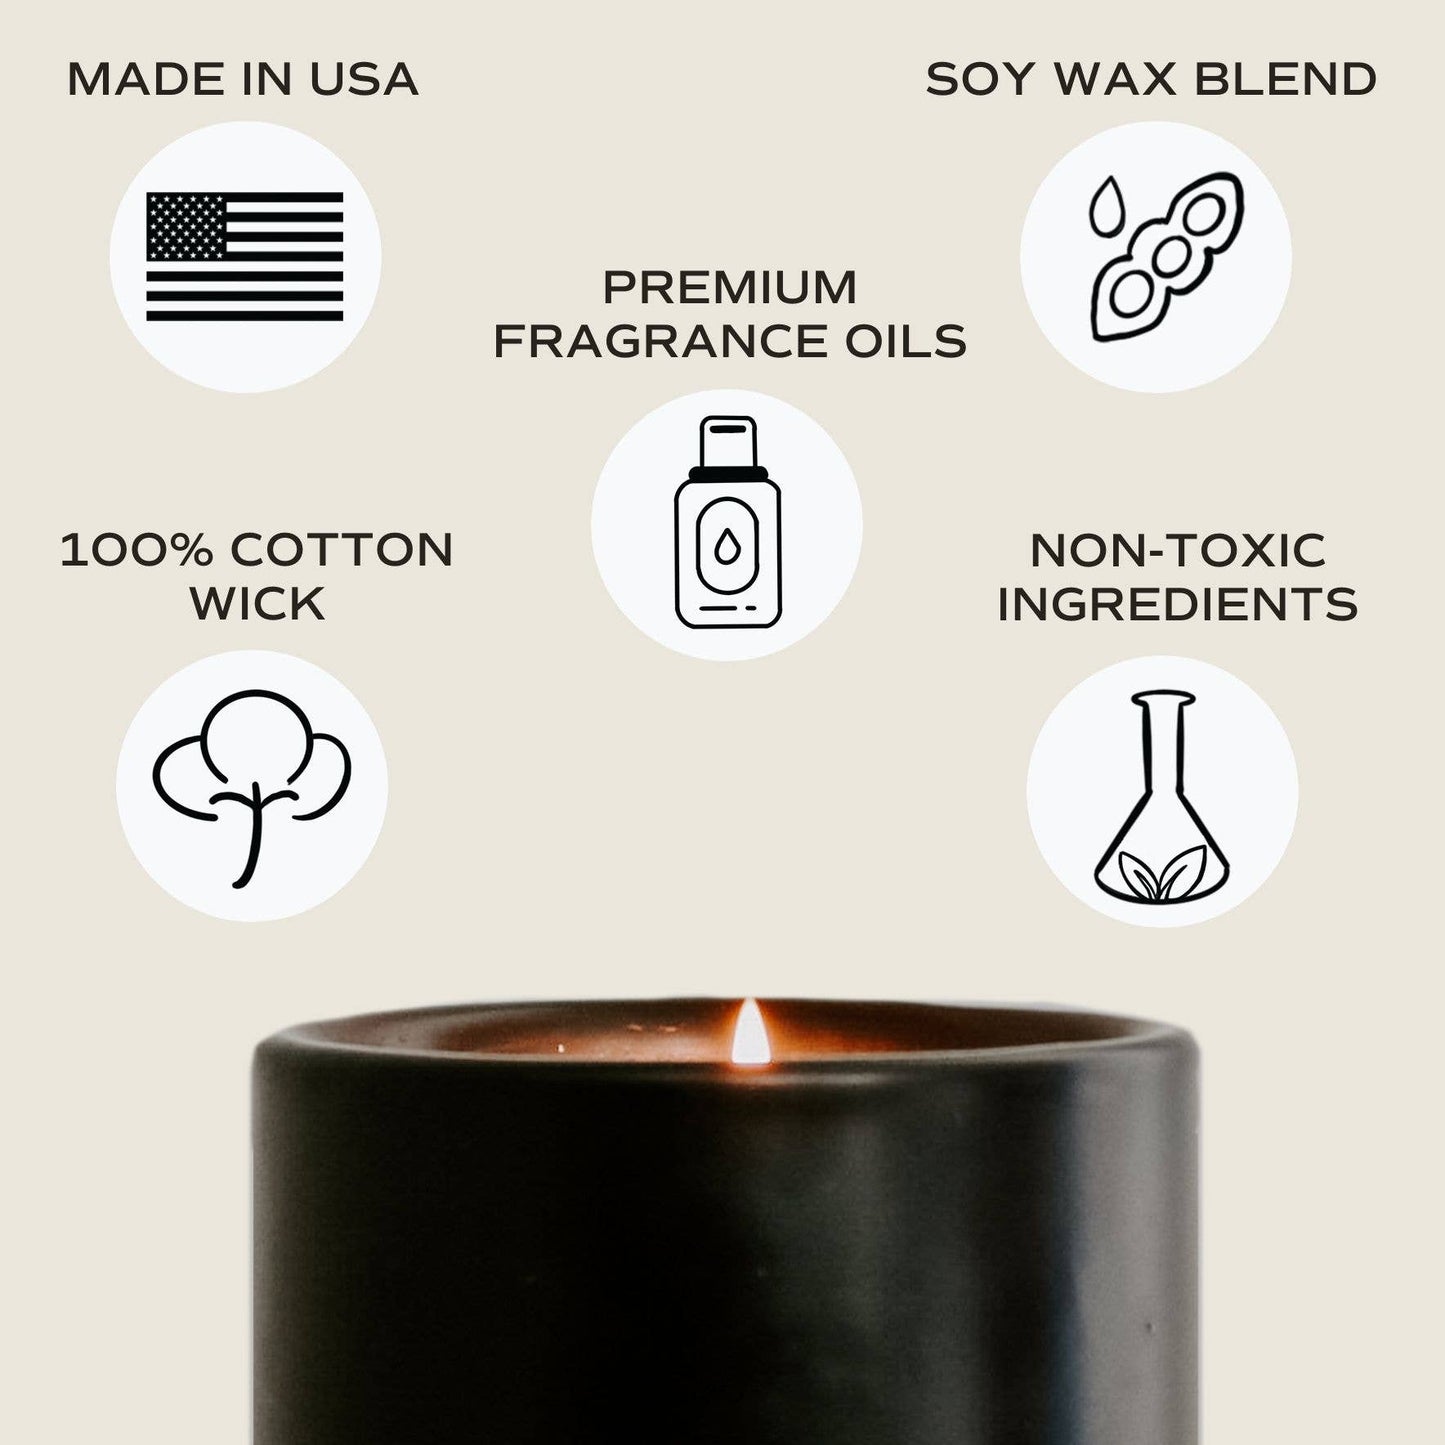 Weekend Soy Candle